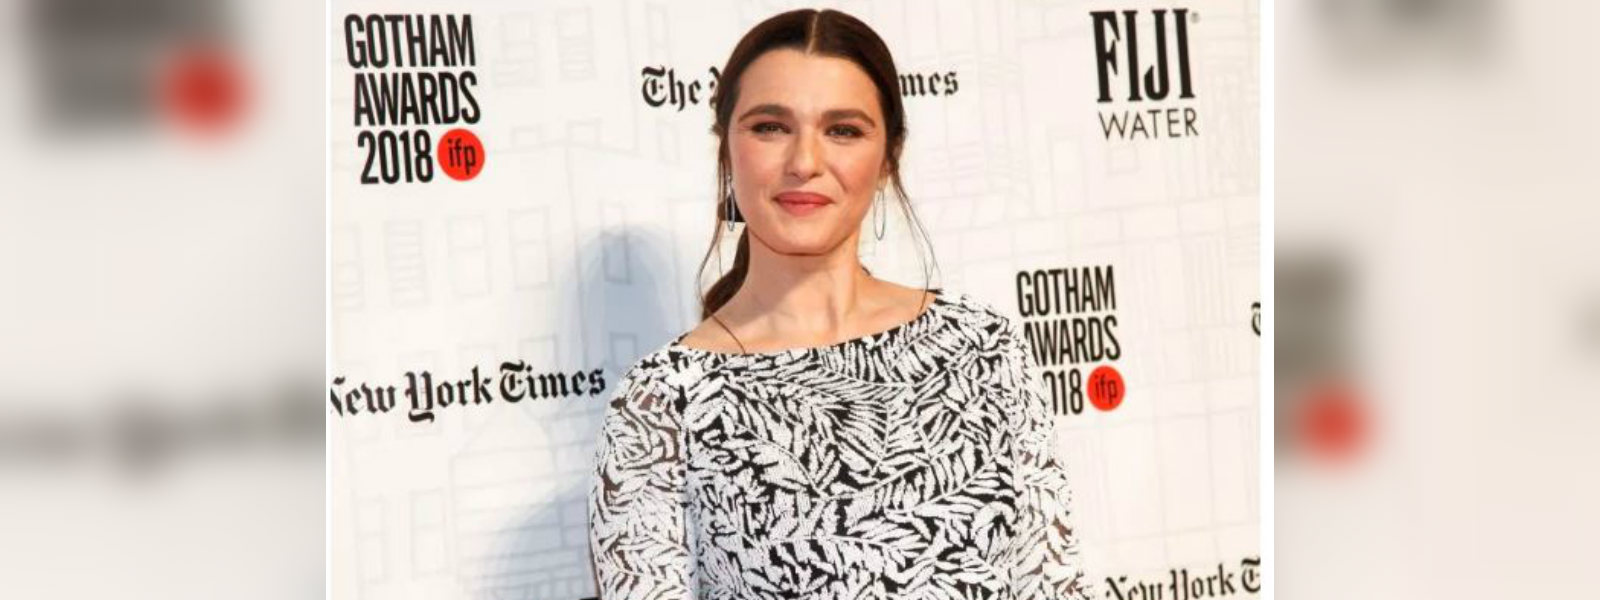 Rachel Weisz is honored at the 28th Gotham awards 